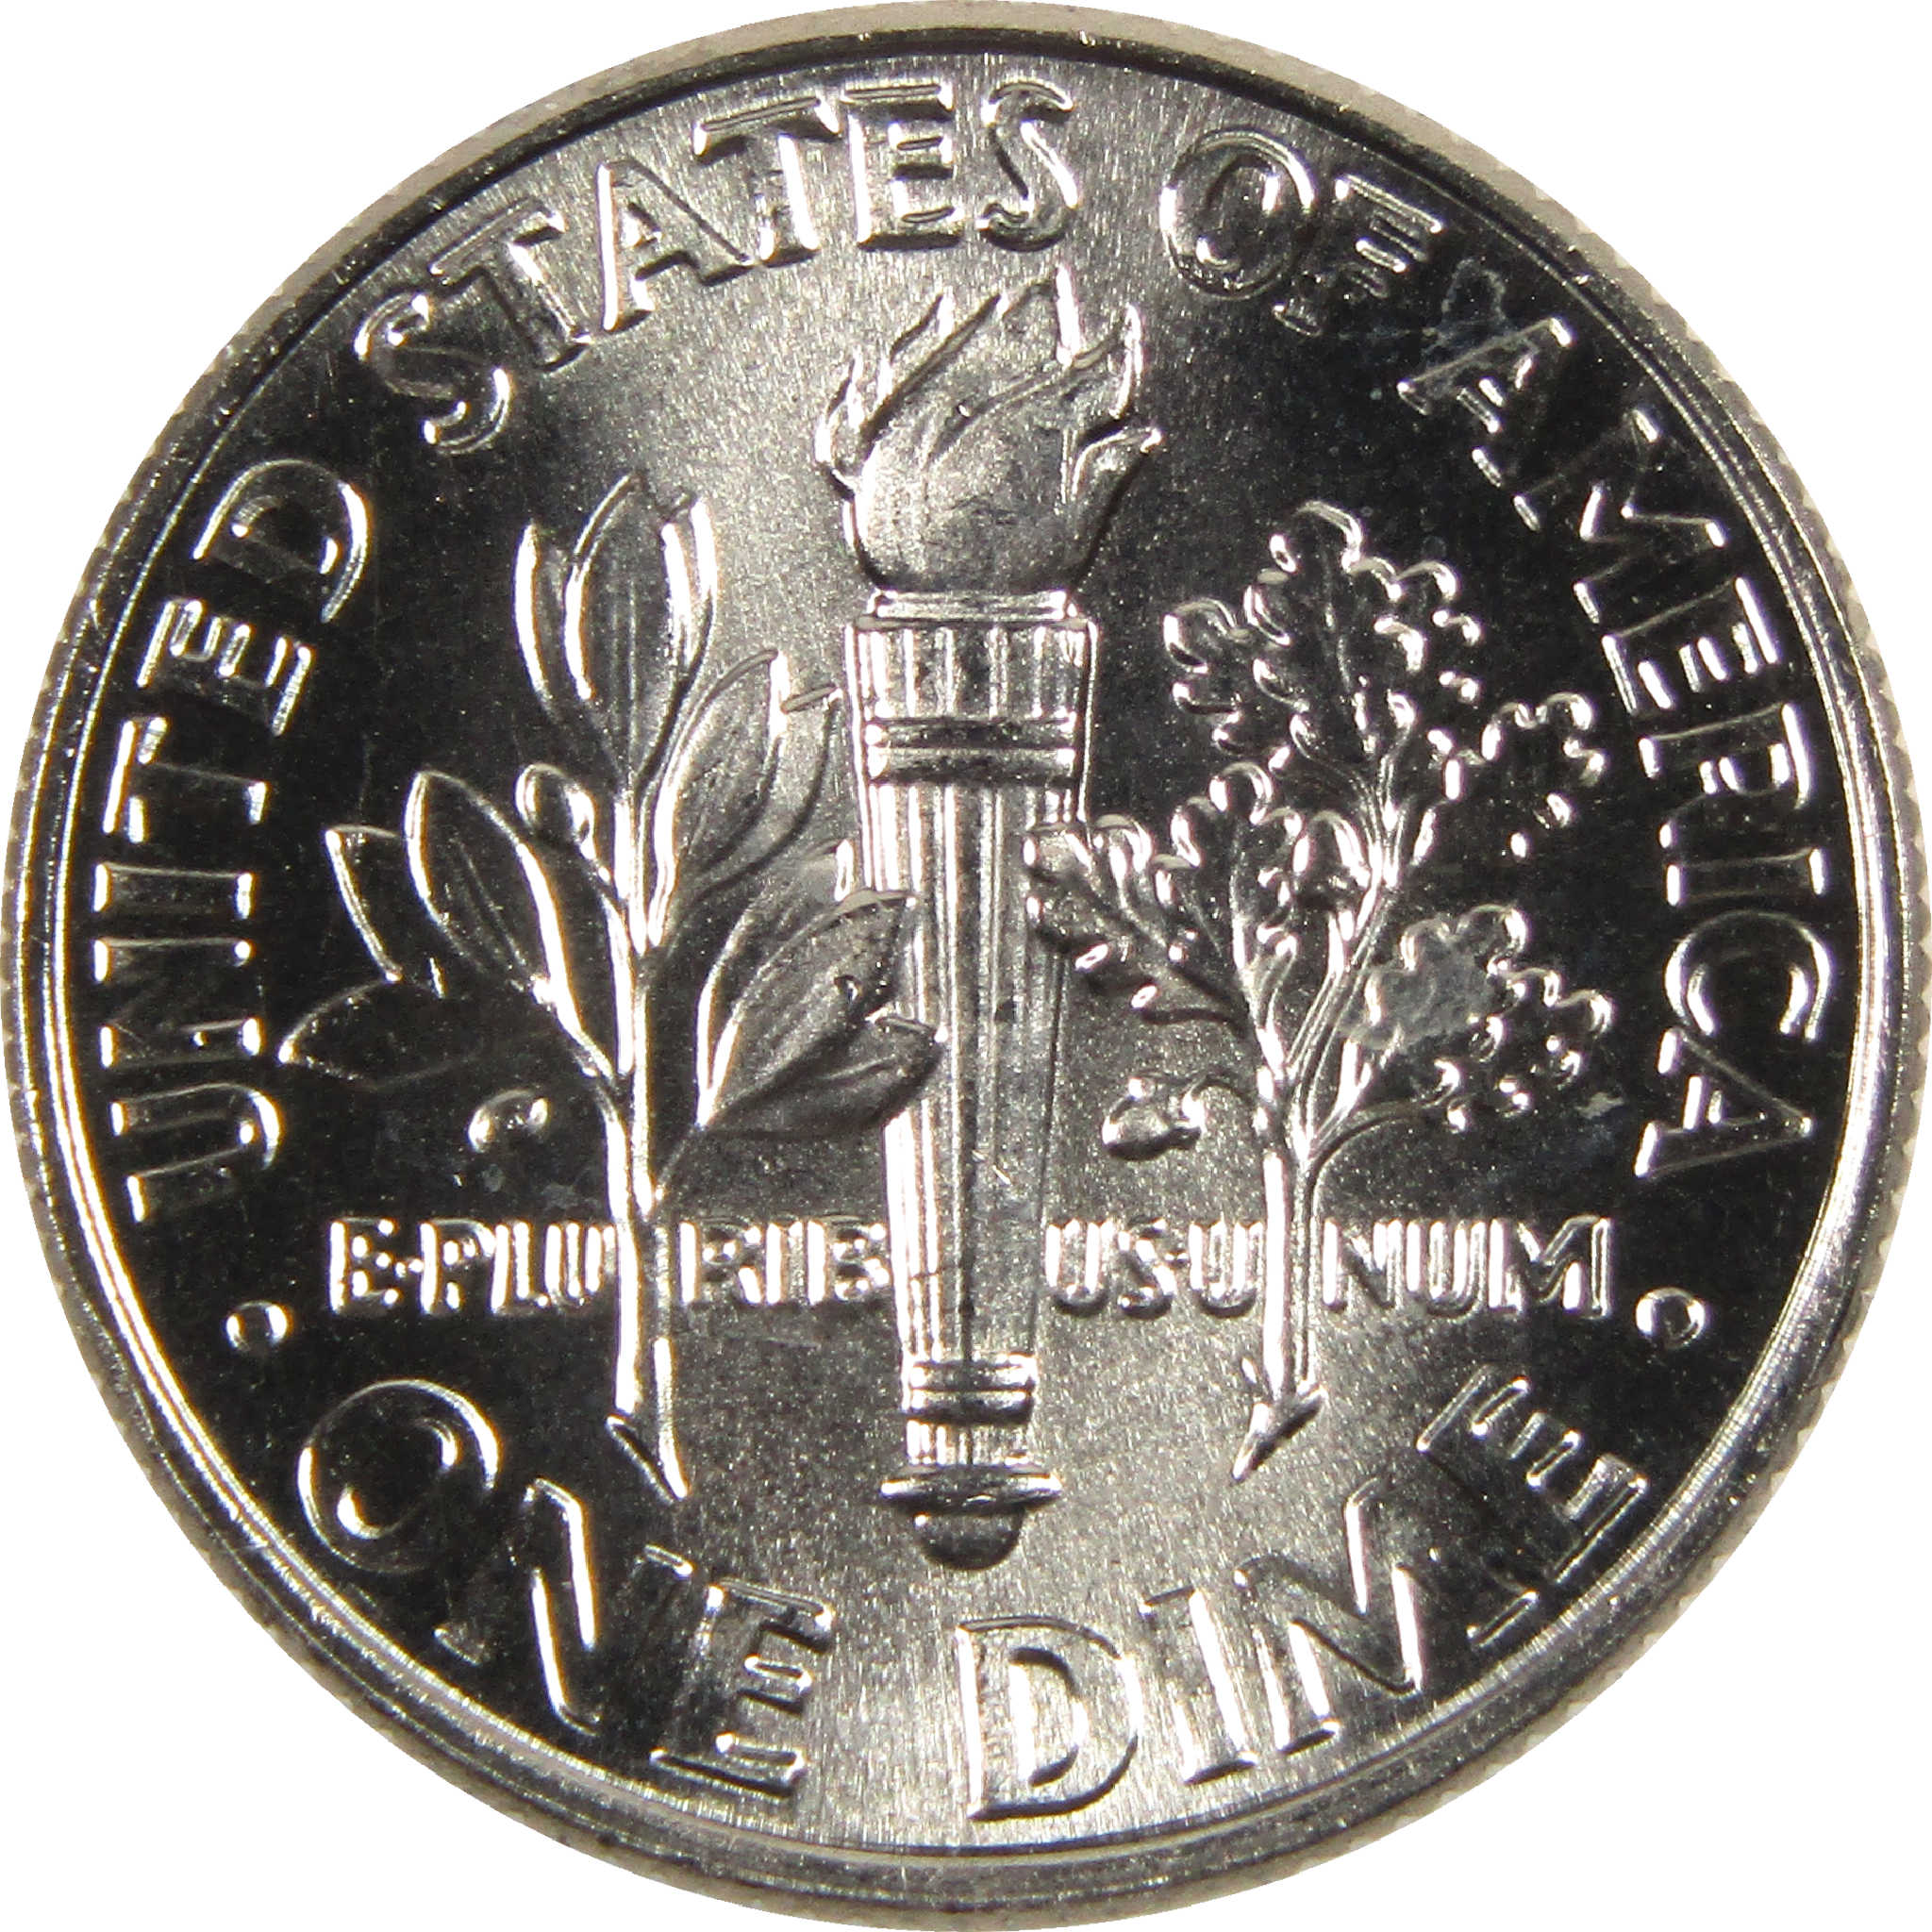 2018 P Roosevelt Dime Uncirculated Clad 10c Coin